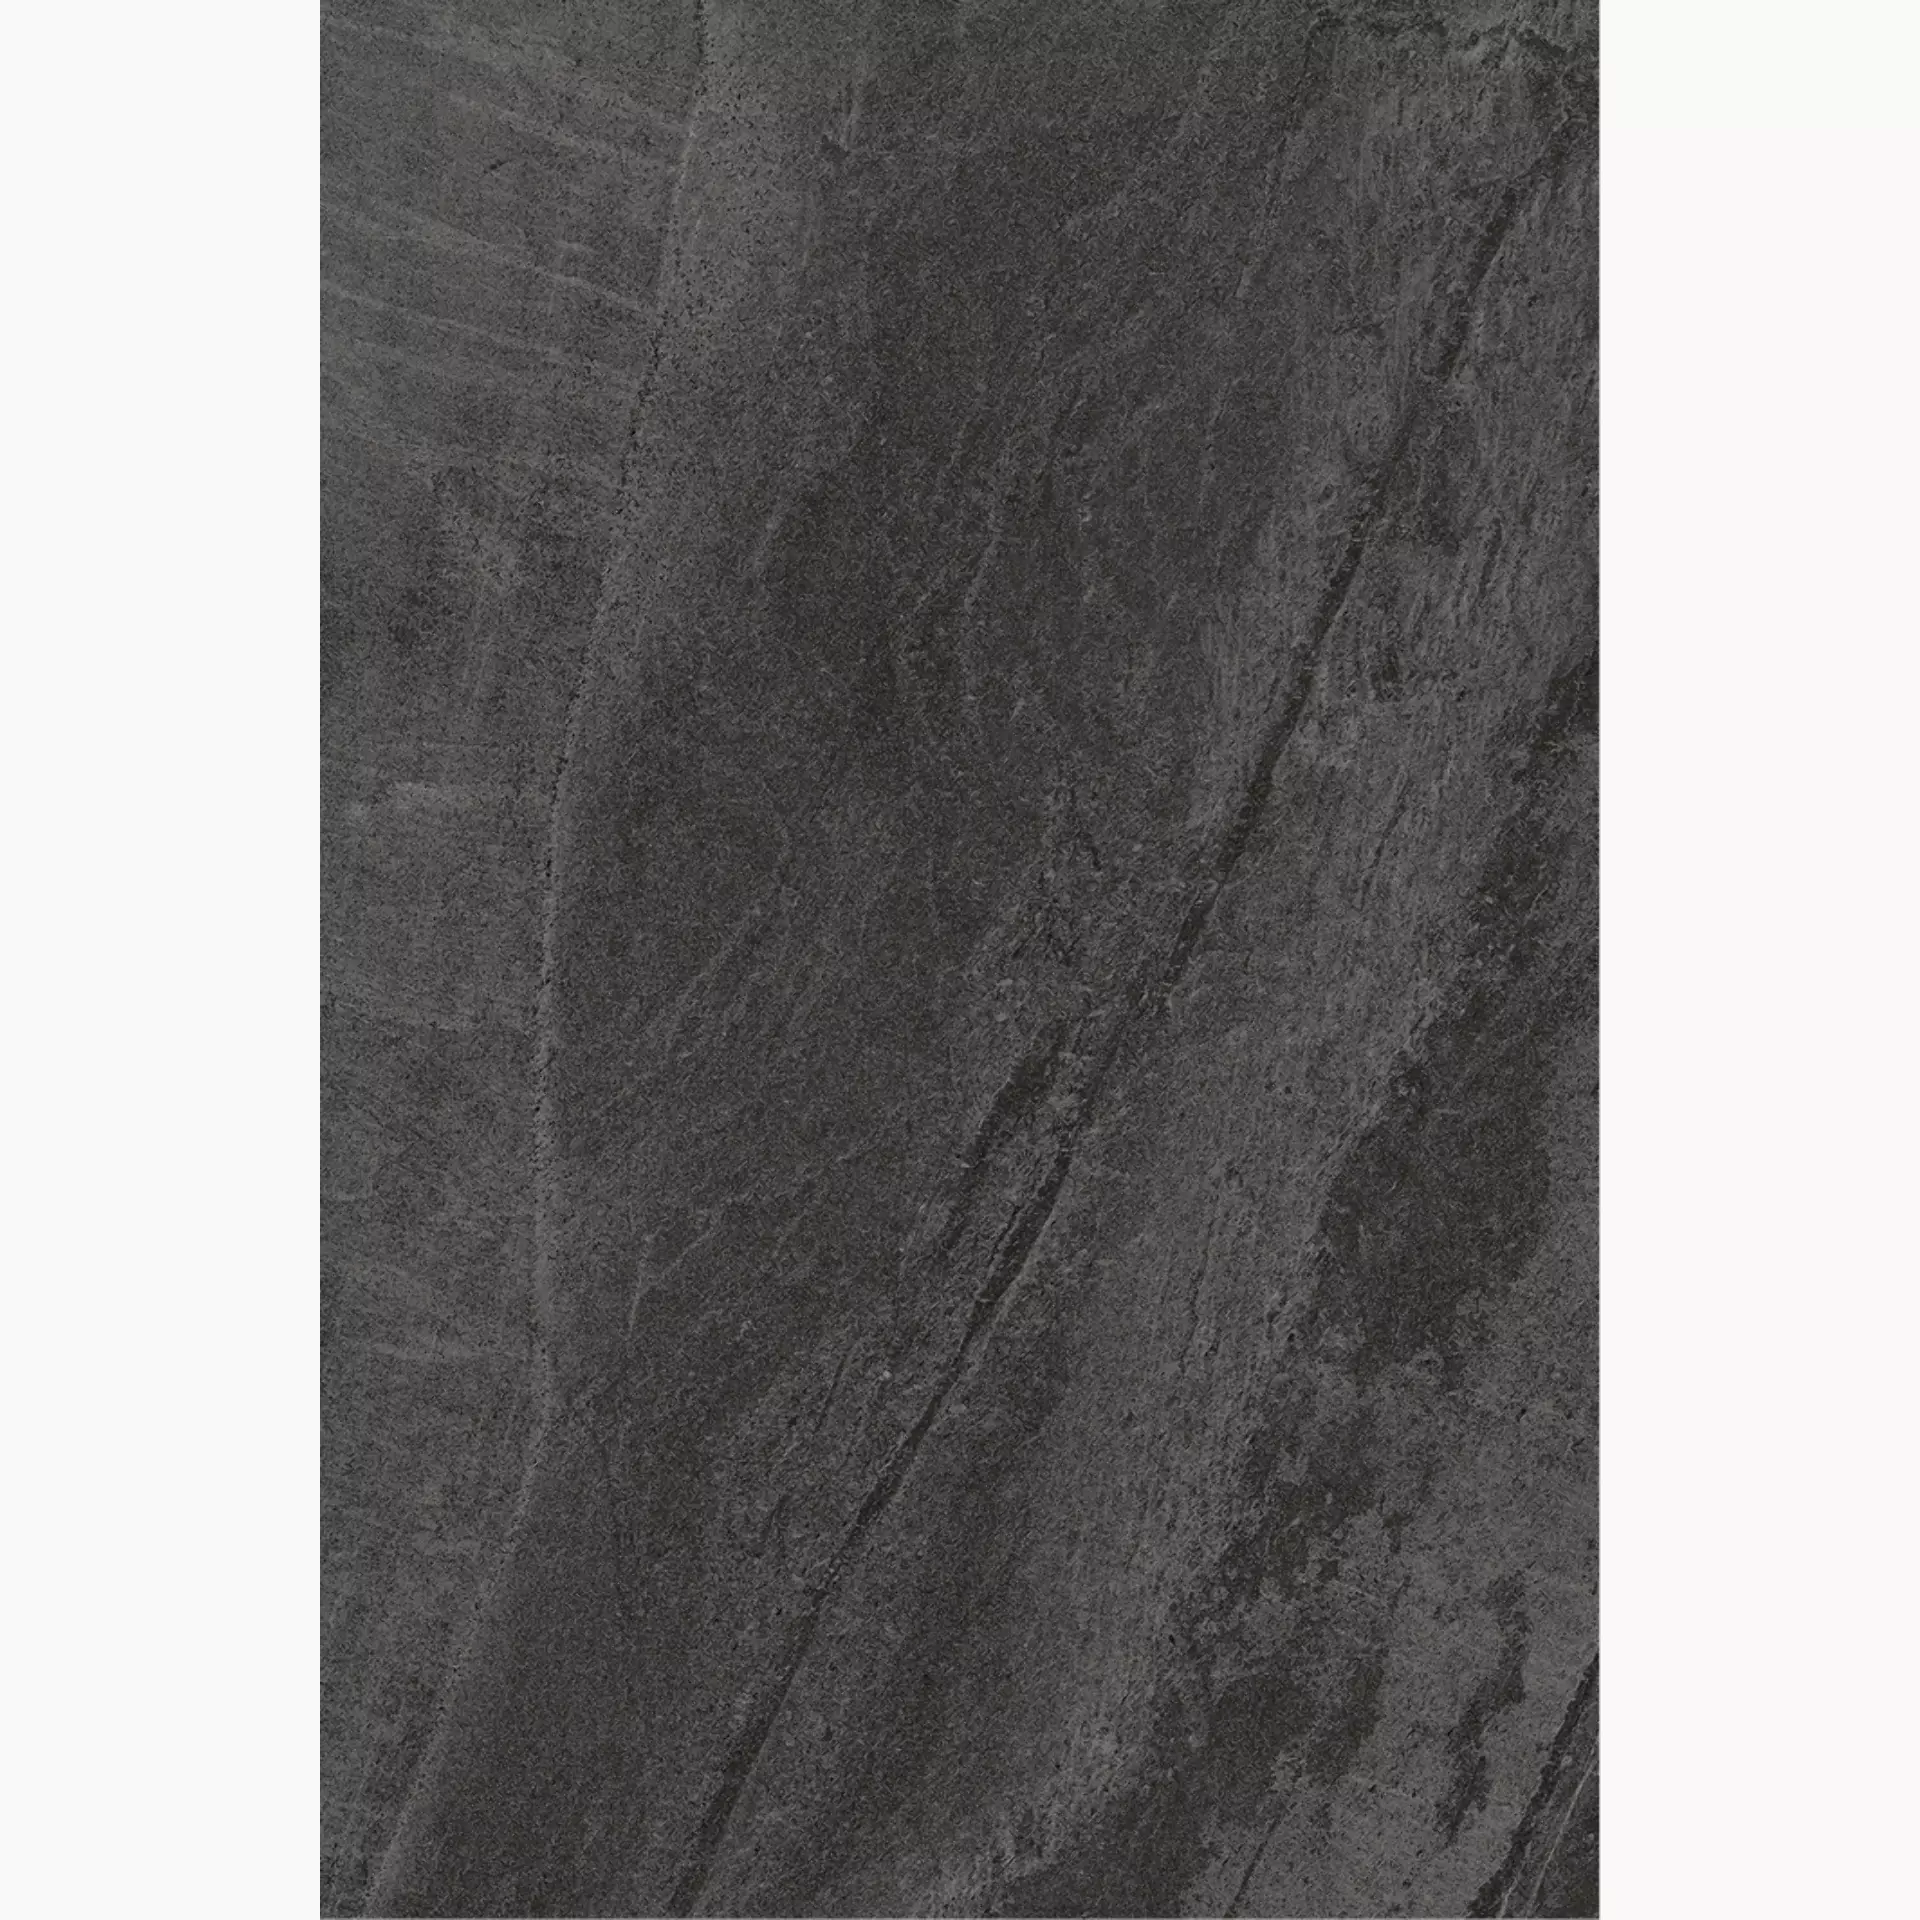 Novabell All Black Nero Naturale ALK99RT 60x90cm rectified 9mm